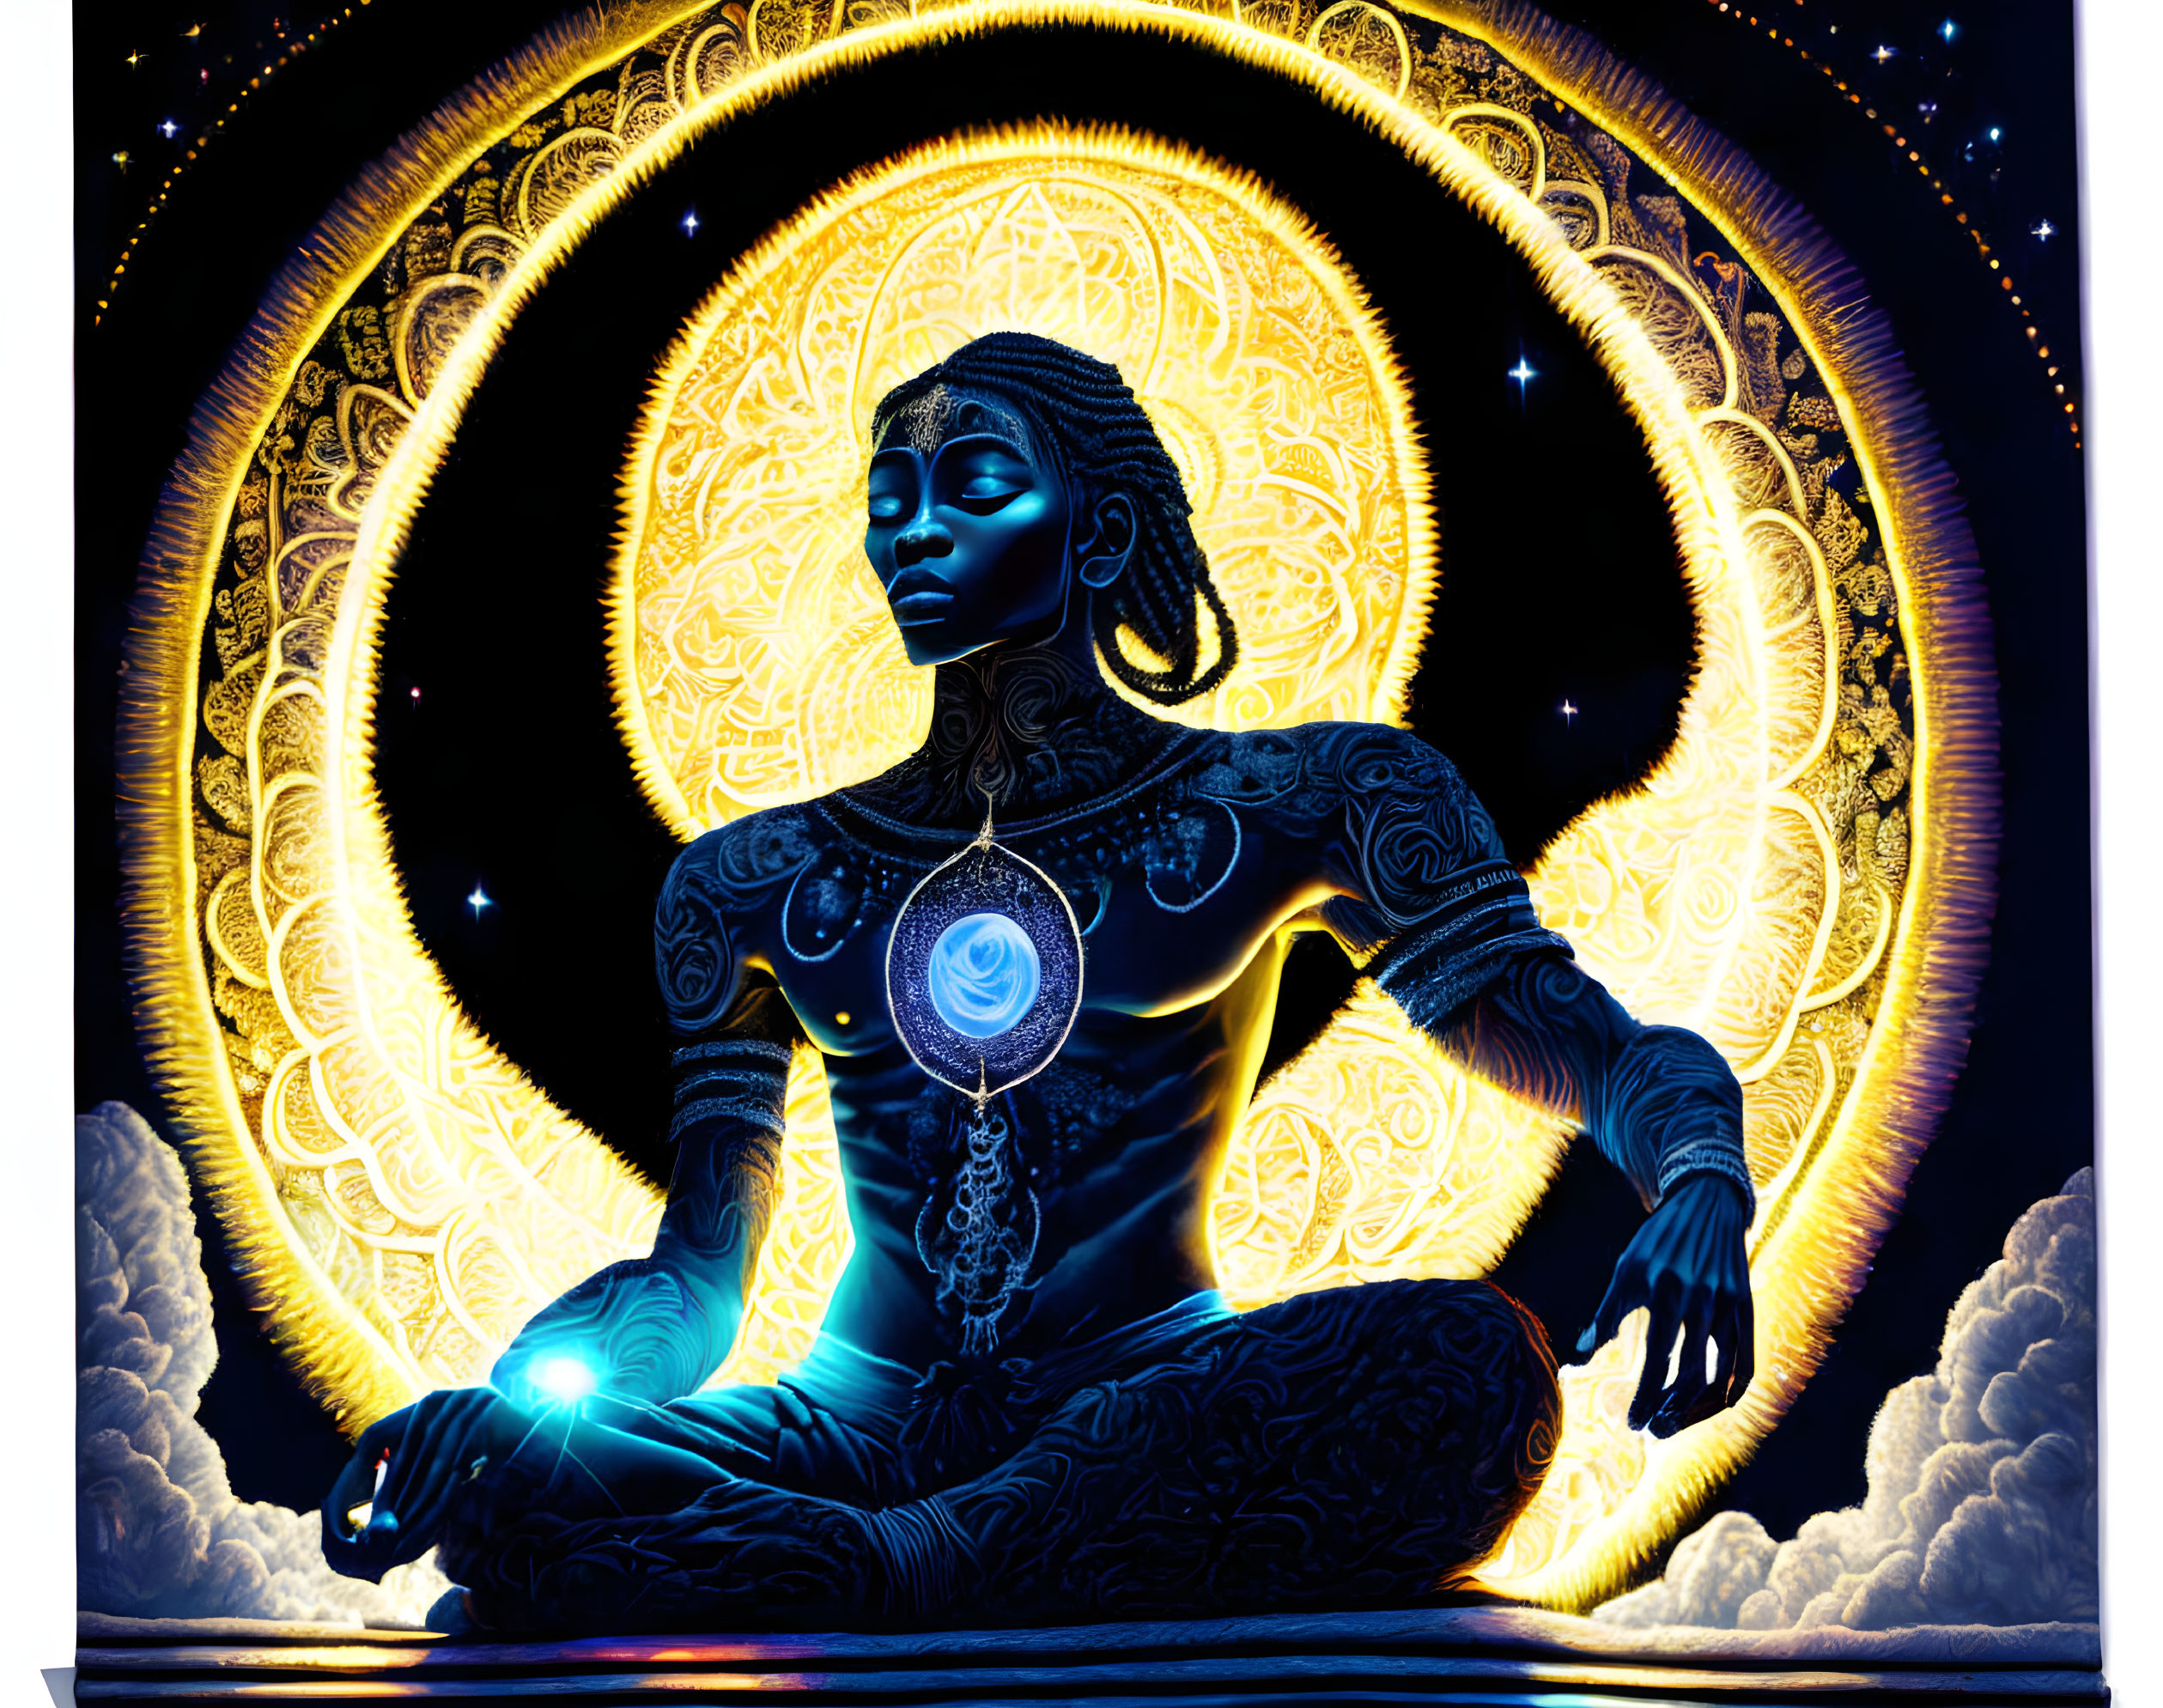 Digital artwork of person in meditative pose with blue skin in cosmic setting